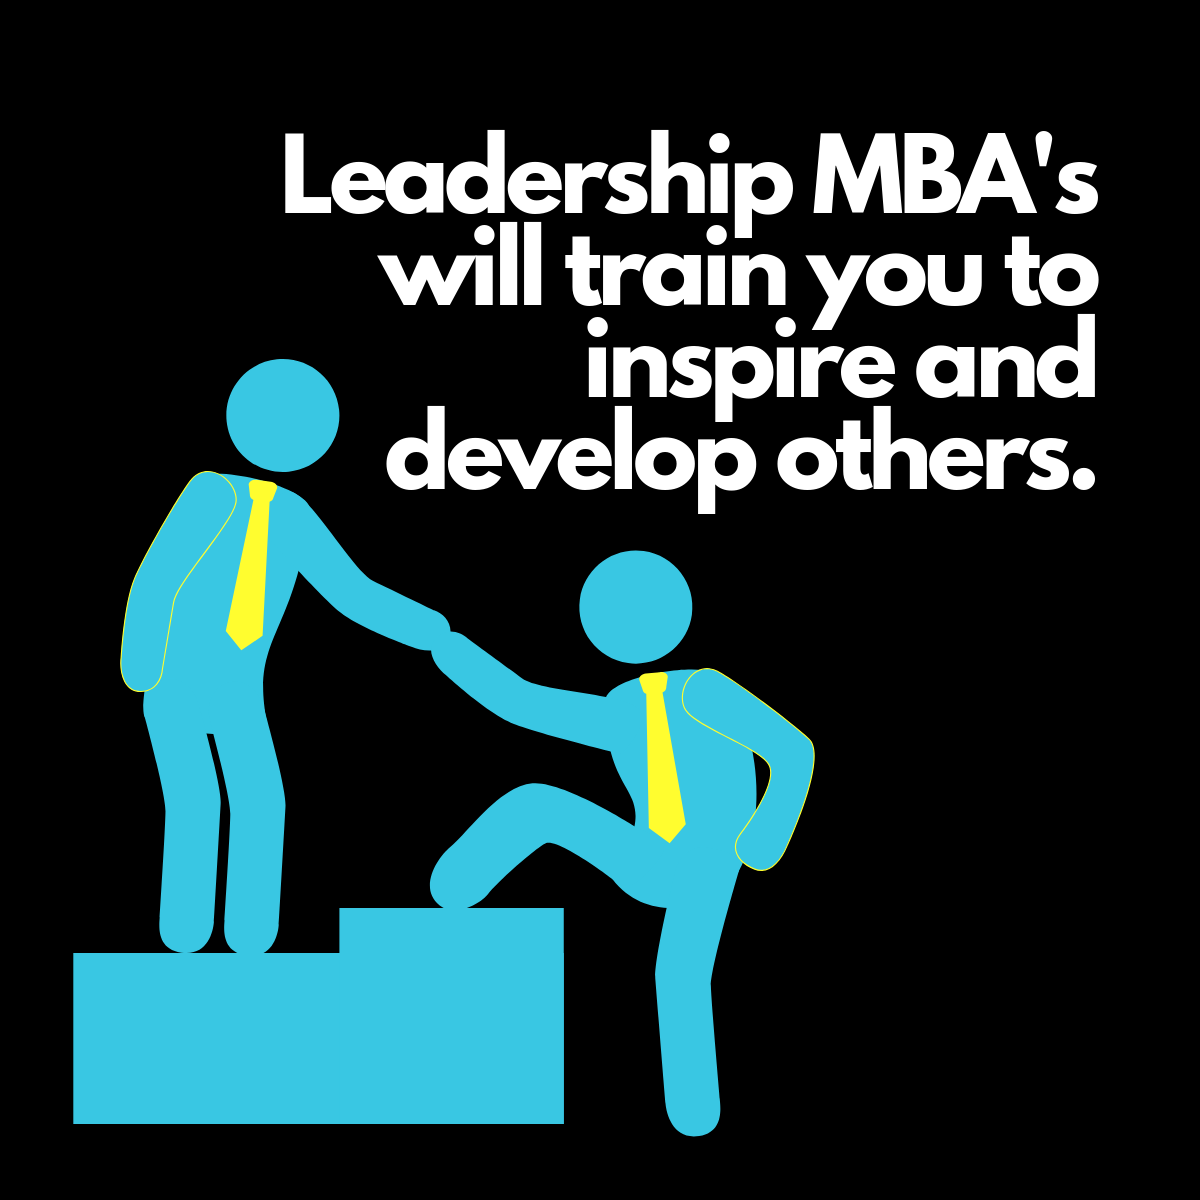 Leadership MBA's will train you to inspire and develop others.